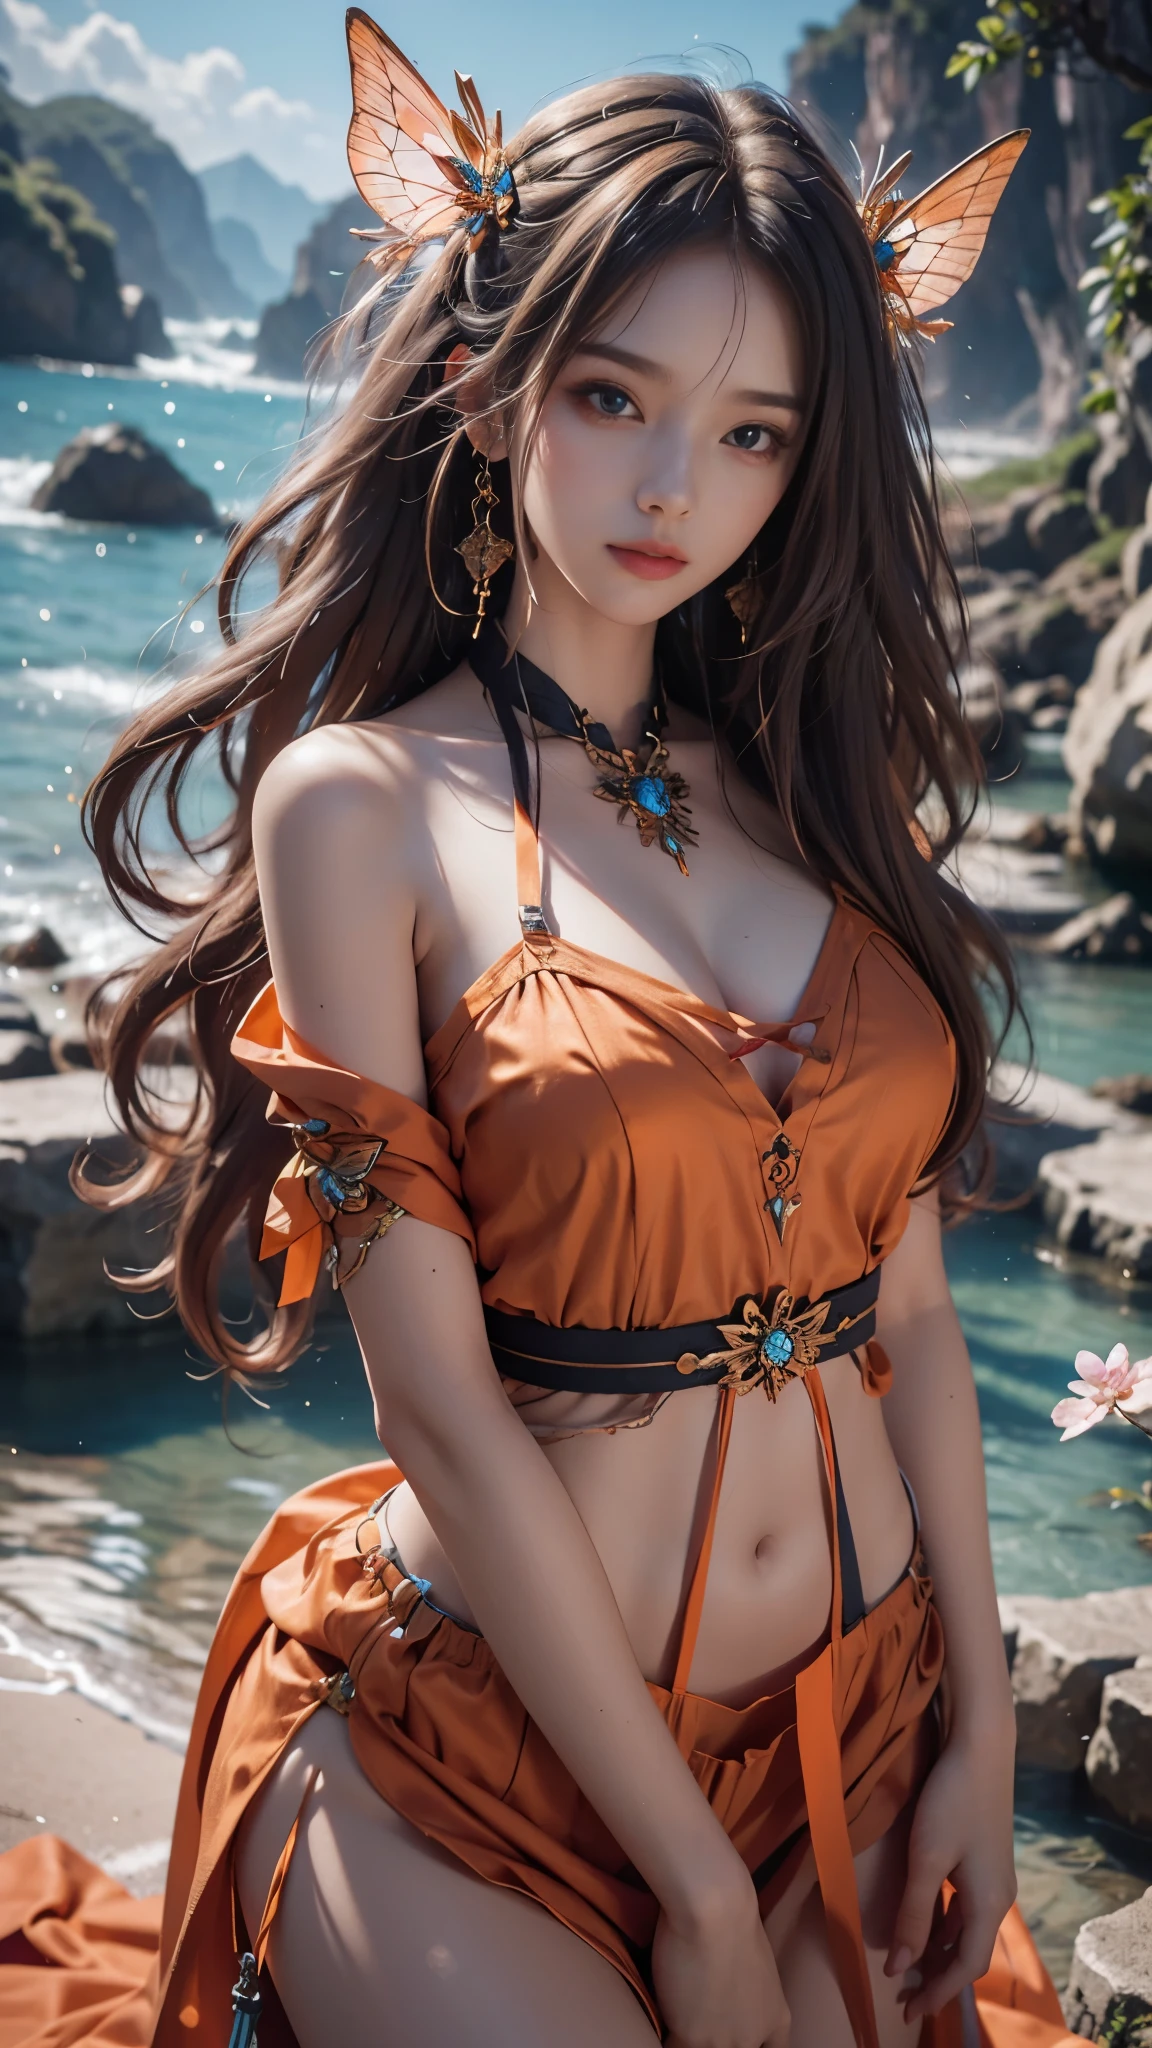 8K, ultra hd, masterpiece, hd colors, 1 girl, perfect face, very long curly hair, detailed eyes, simple clothing, ((orange clothing)), stocking, lace, very long sardine, straps, strips,  bare waist, net clothing, long loops, jwellery, waterside, Realistic scenery, epic scenery, sun rising, evening, clouds, Butterfly, cherry blossom, blowing wind, perfect pose,